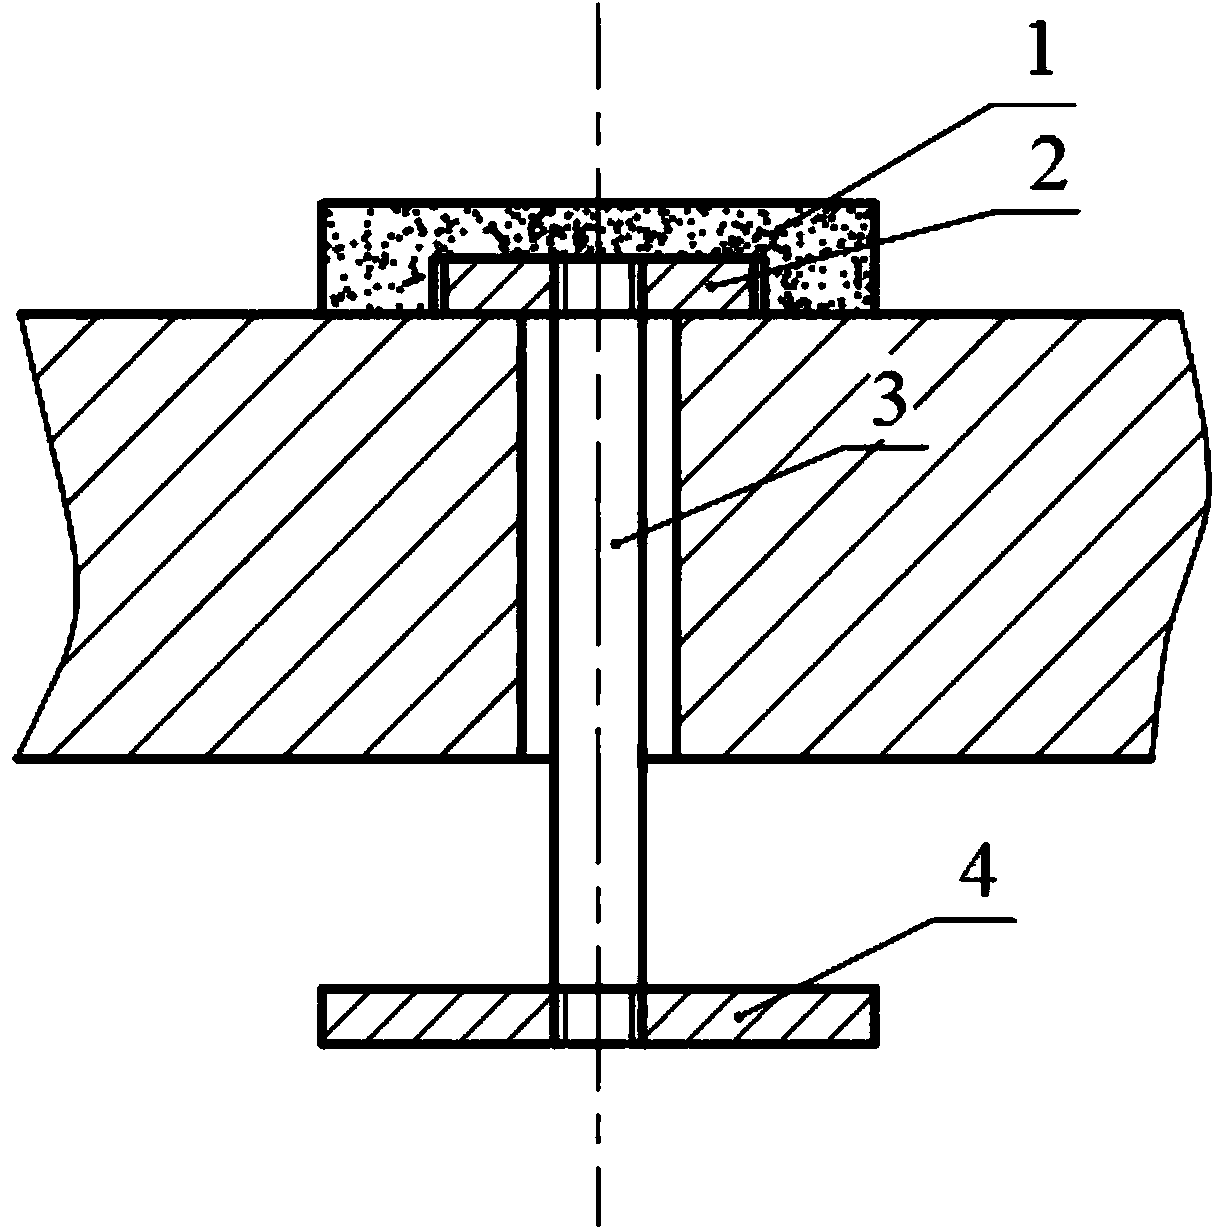 Device for measuring heating mass loss rate of explosive powder